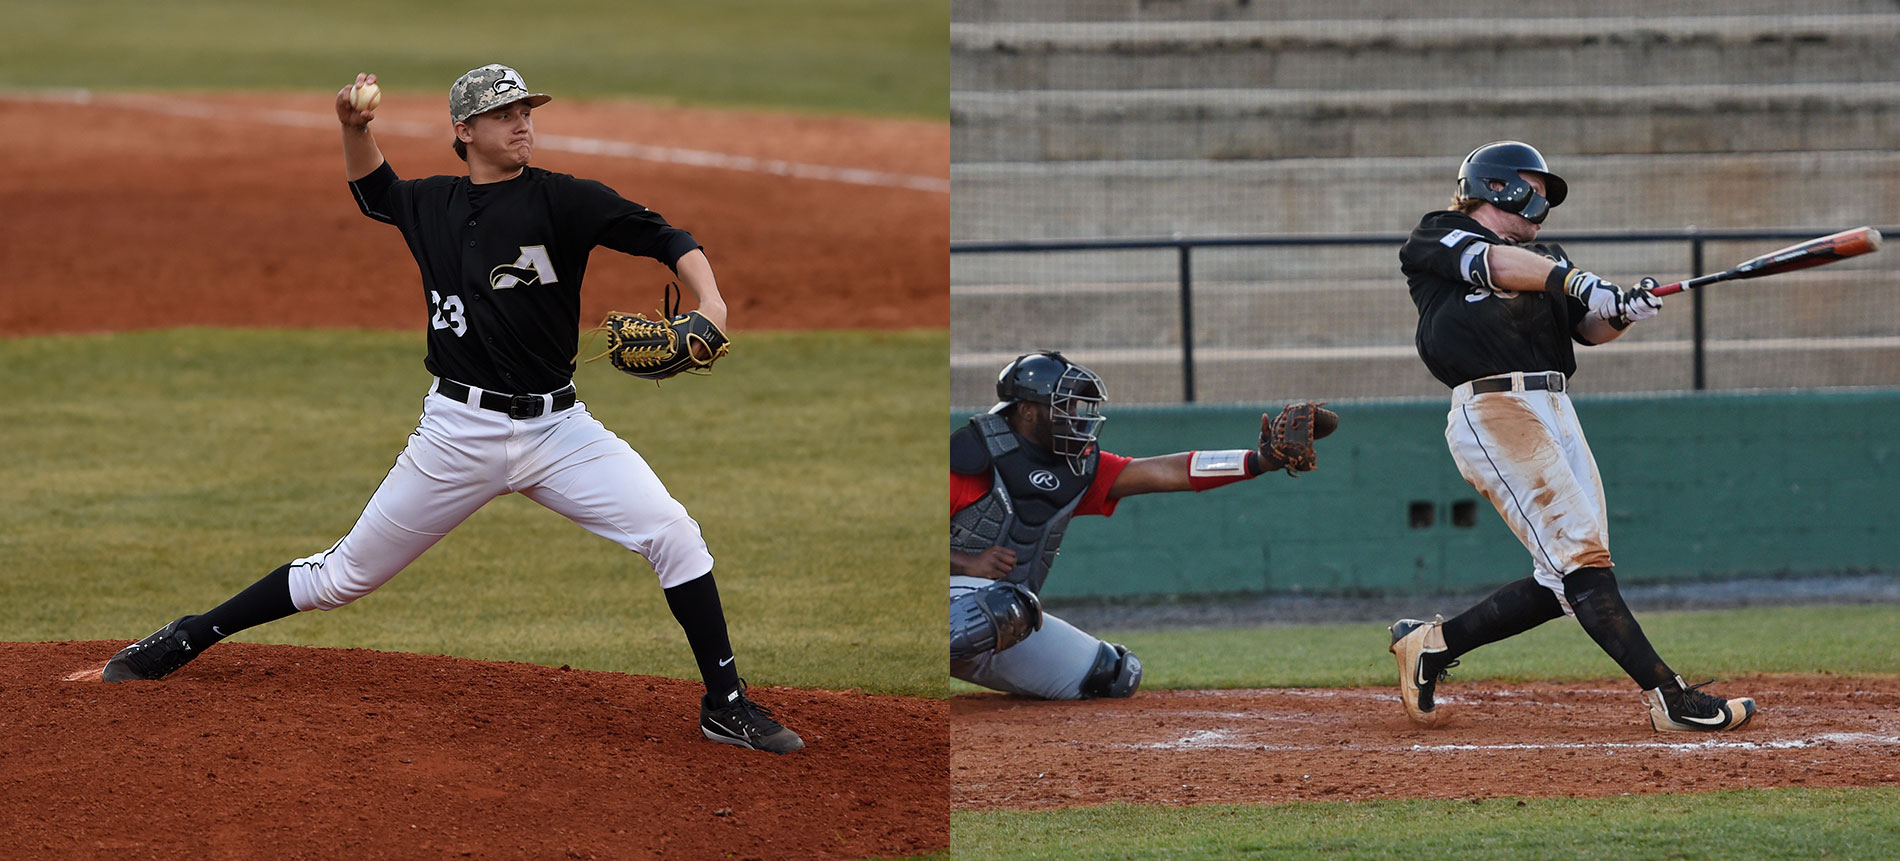 Overton and Dill Lead Trojans to Split with Catawba